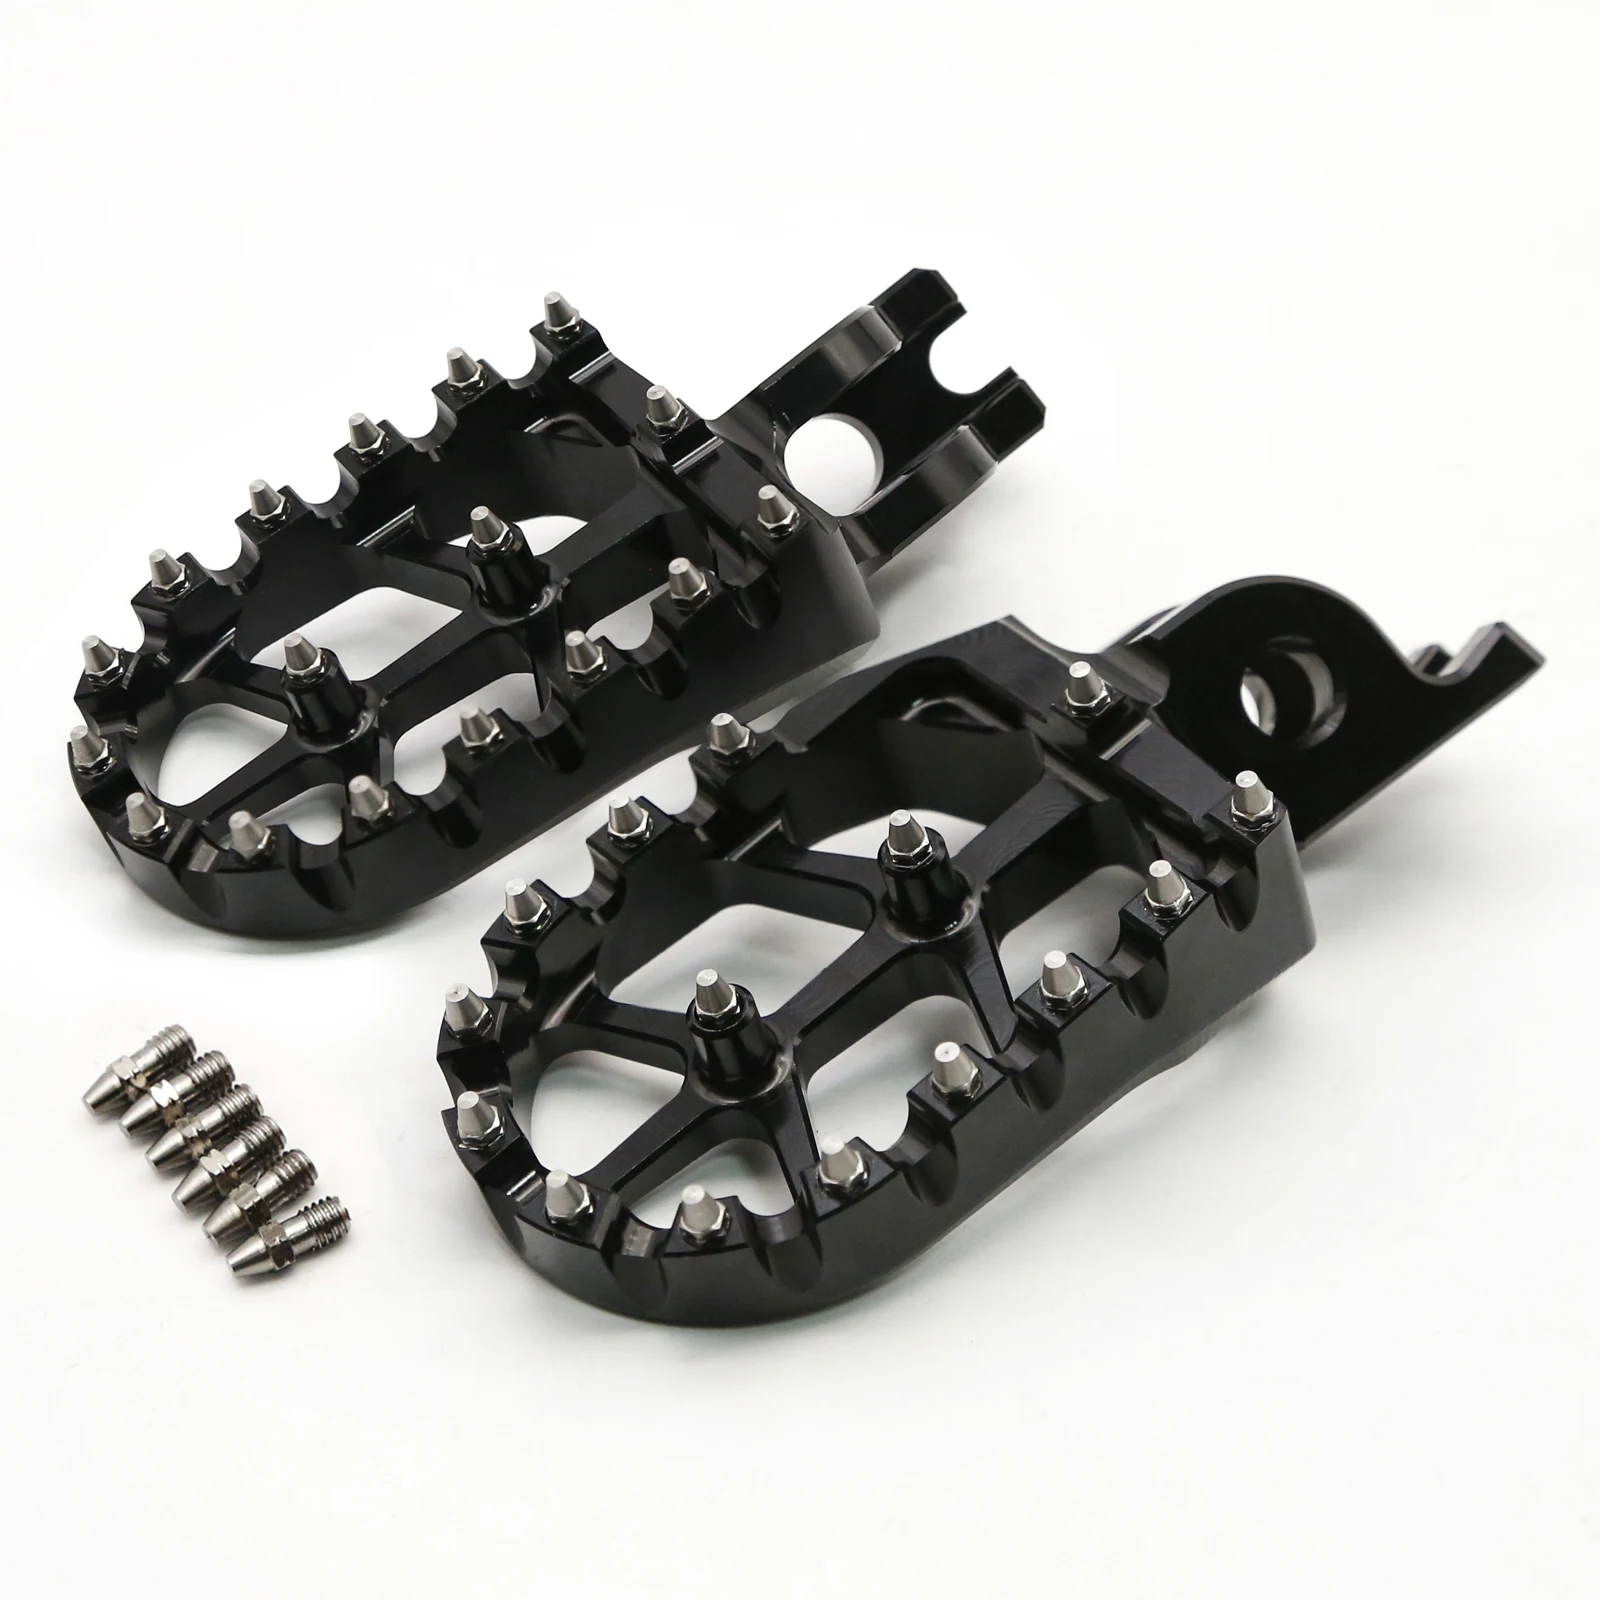 

For KAWASAKI KX250 KX450 KX KX250F KX450F KXF 250 450 KLX450R KX250X KX450X CNC Foot Rests Footrest Footpegs Pegs Pedals